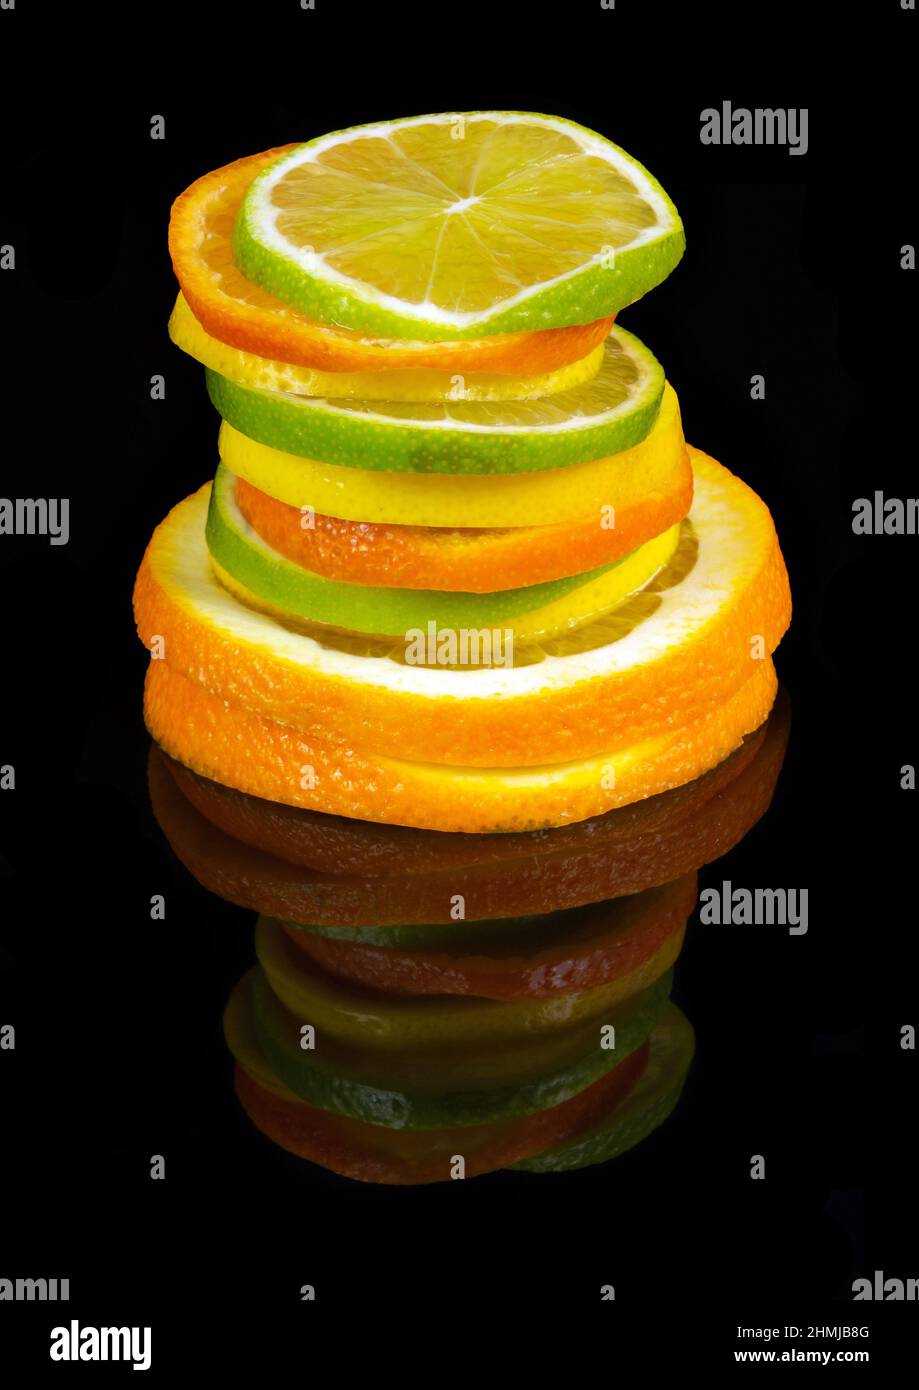 Cuts of different citric fruits on black background Stock Photo